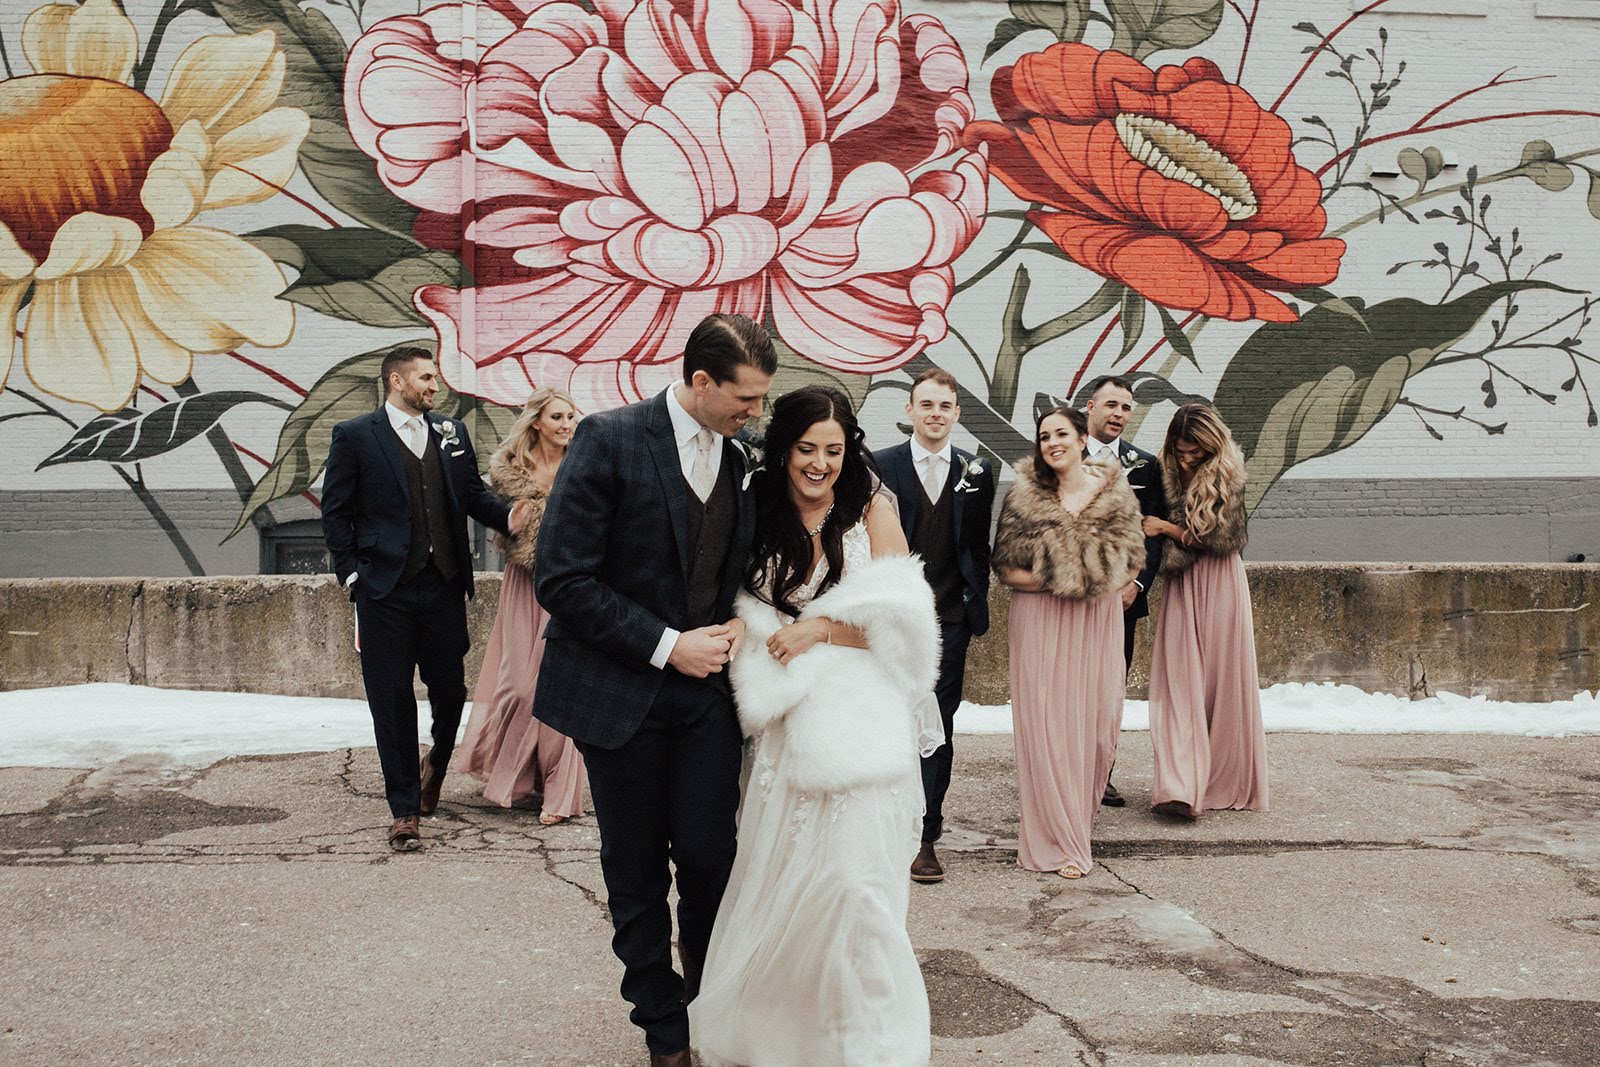 Murals in downtown Jackson provided such a backdrop for their bridal party pictures.